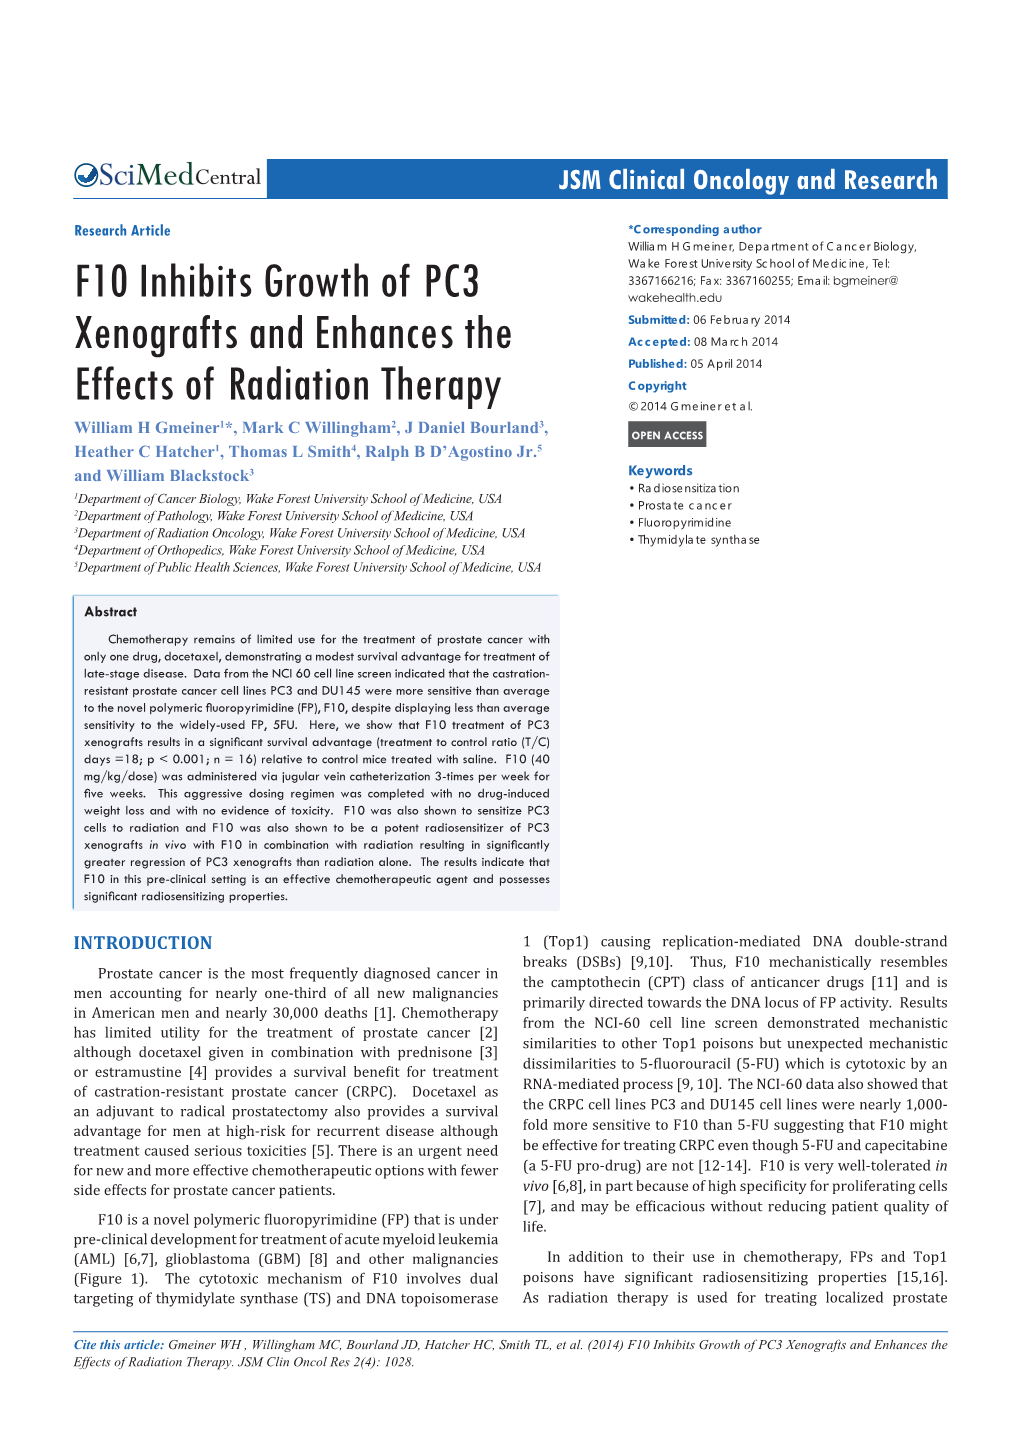 F10 Inhibits Growth of PC3 Xenografts and Enhances the Effects of Radiation Therapy